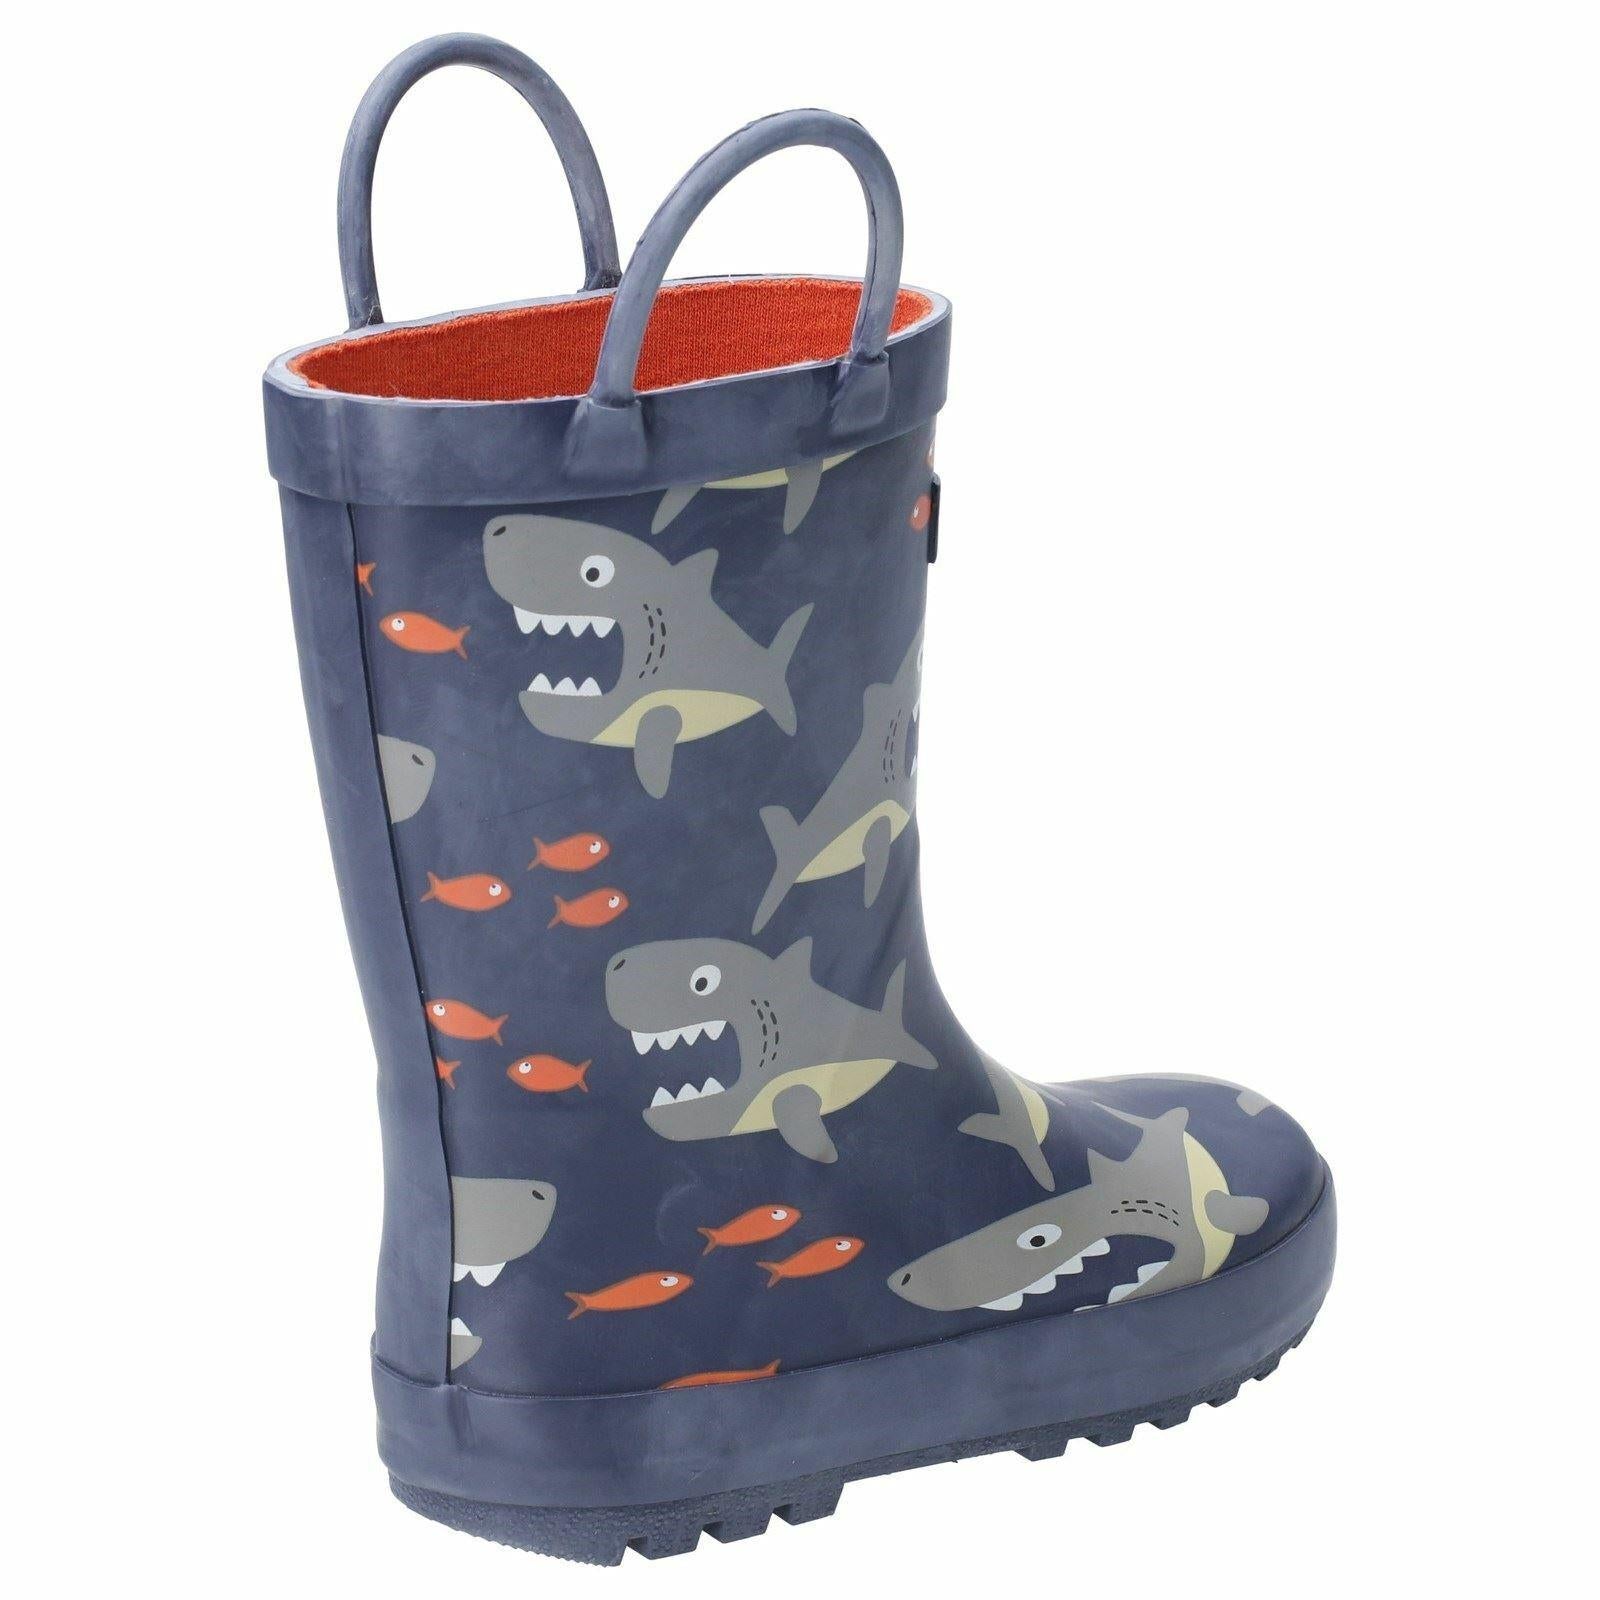 Cotswold Puddle Shark kid's rubber waterproof pull-on wellington boot